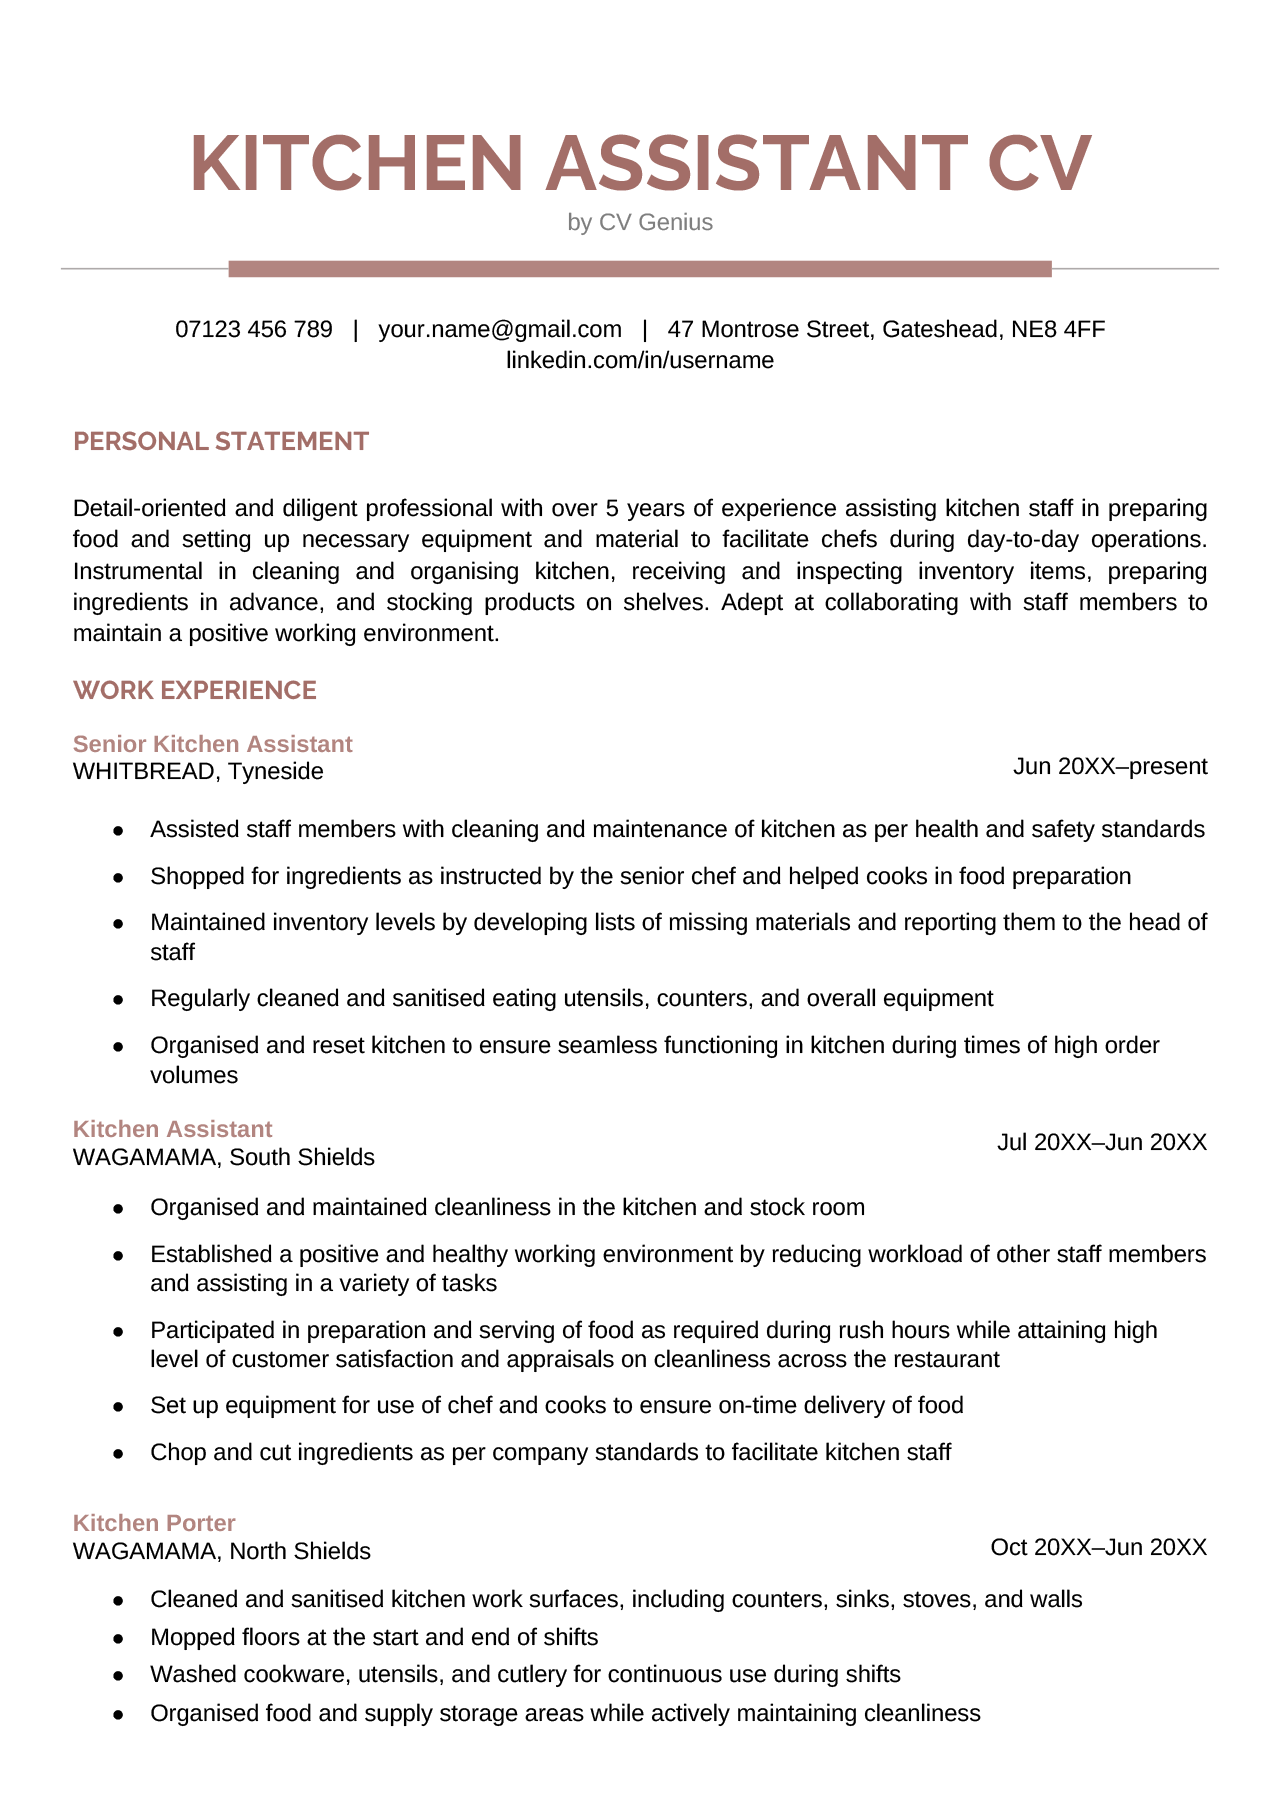 The first page of a kitchen assistant CV example.